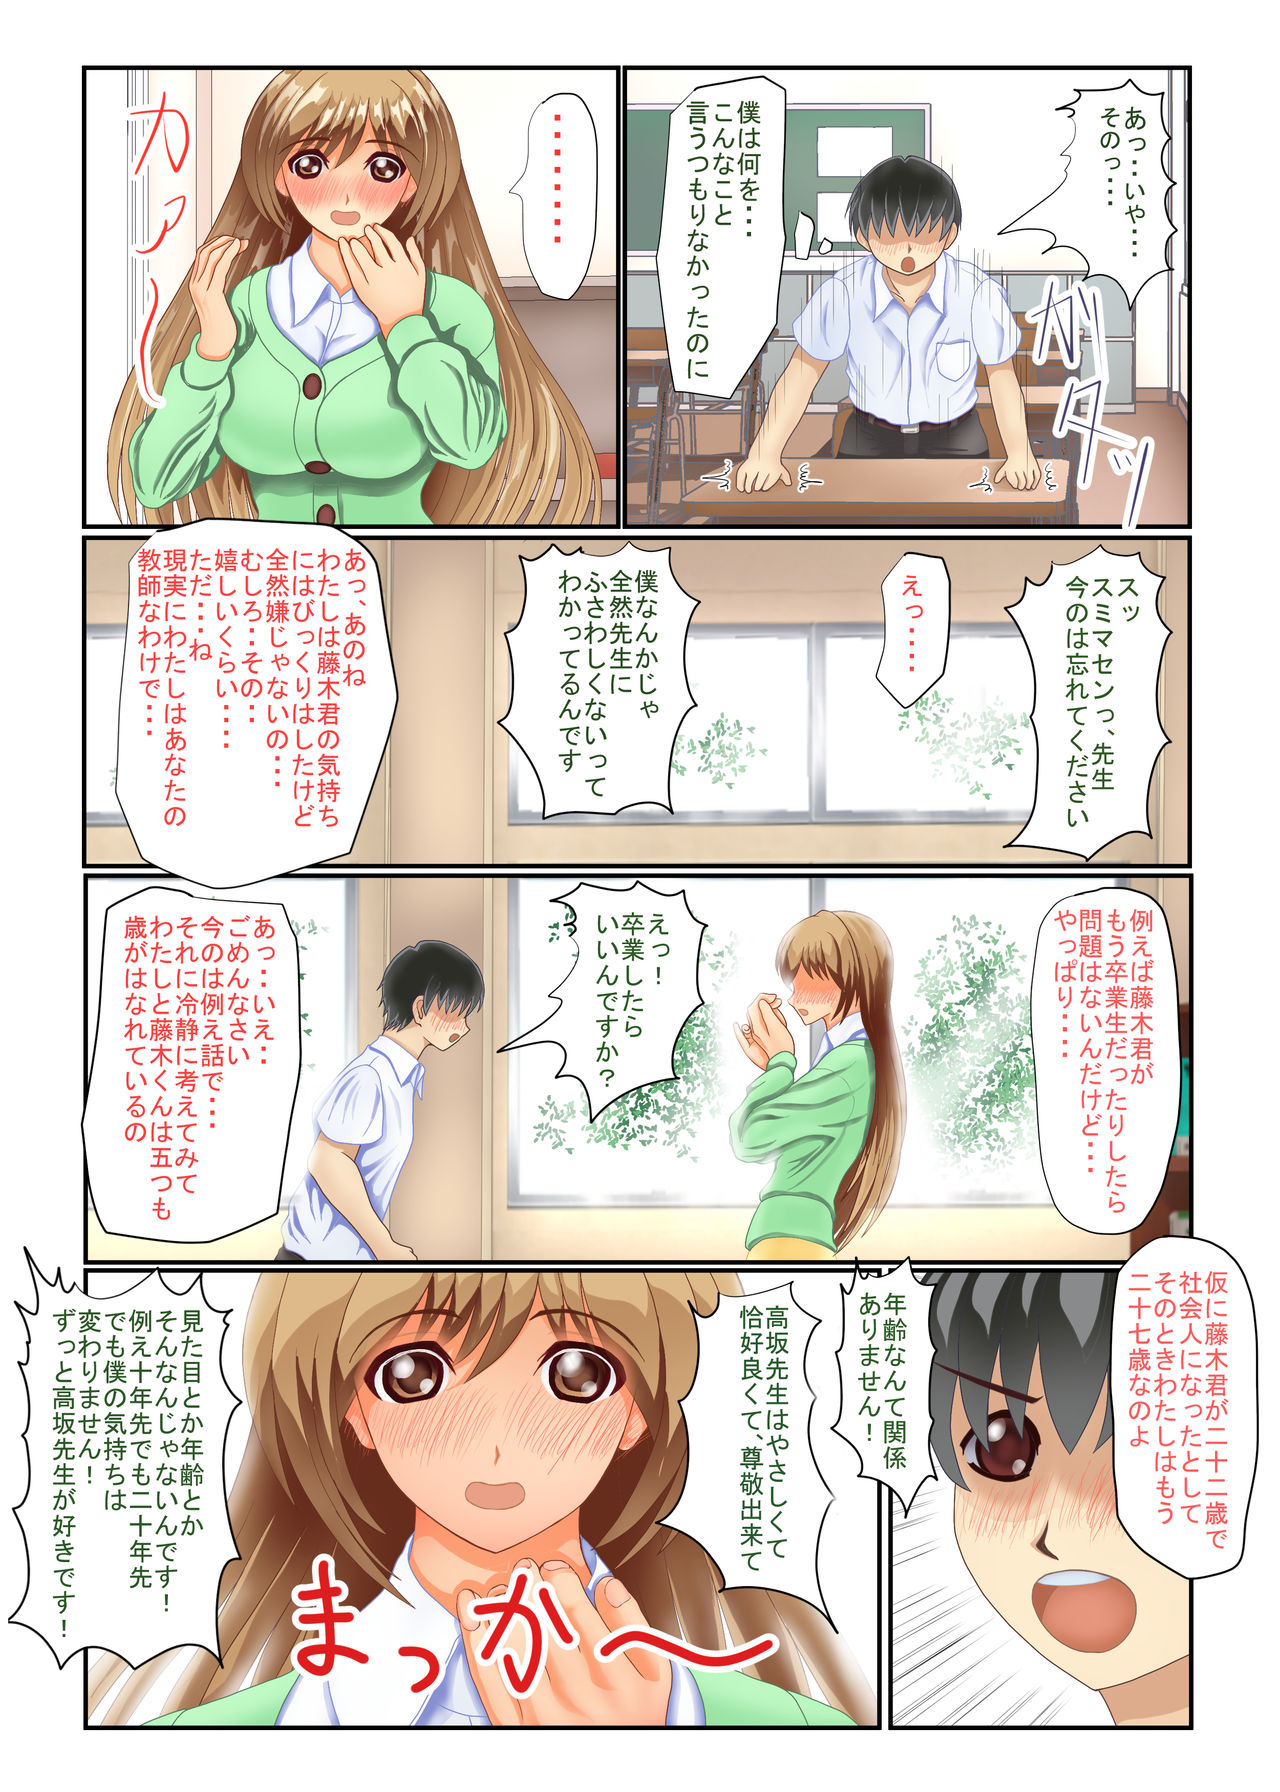 [KumakuraMizu] Violated Teacher - My Teacher & First Love Tricked, Snatched and Depraved by Delinquents page 7 full